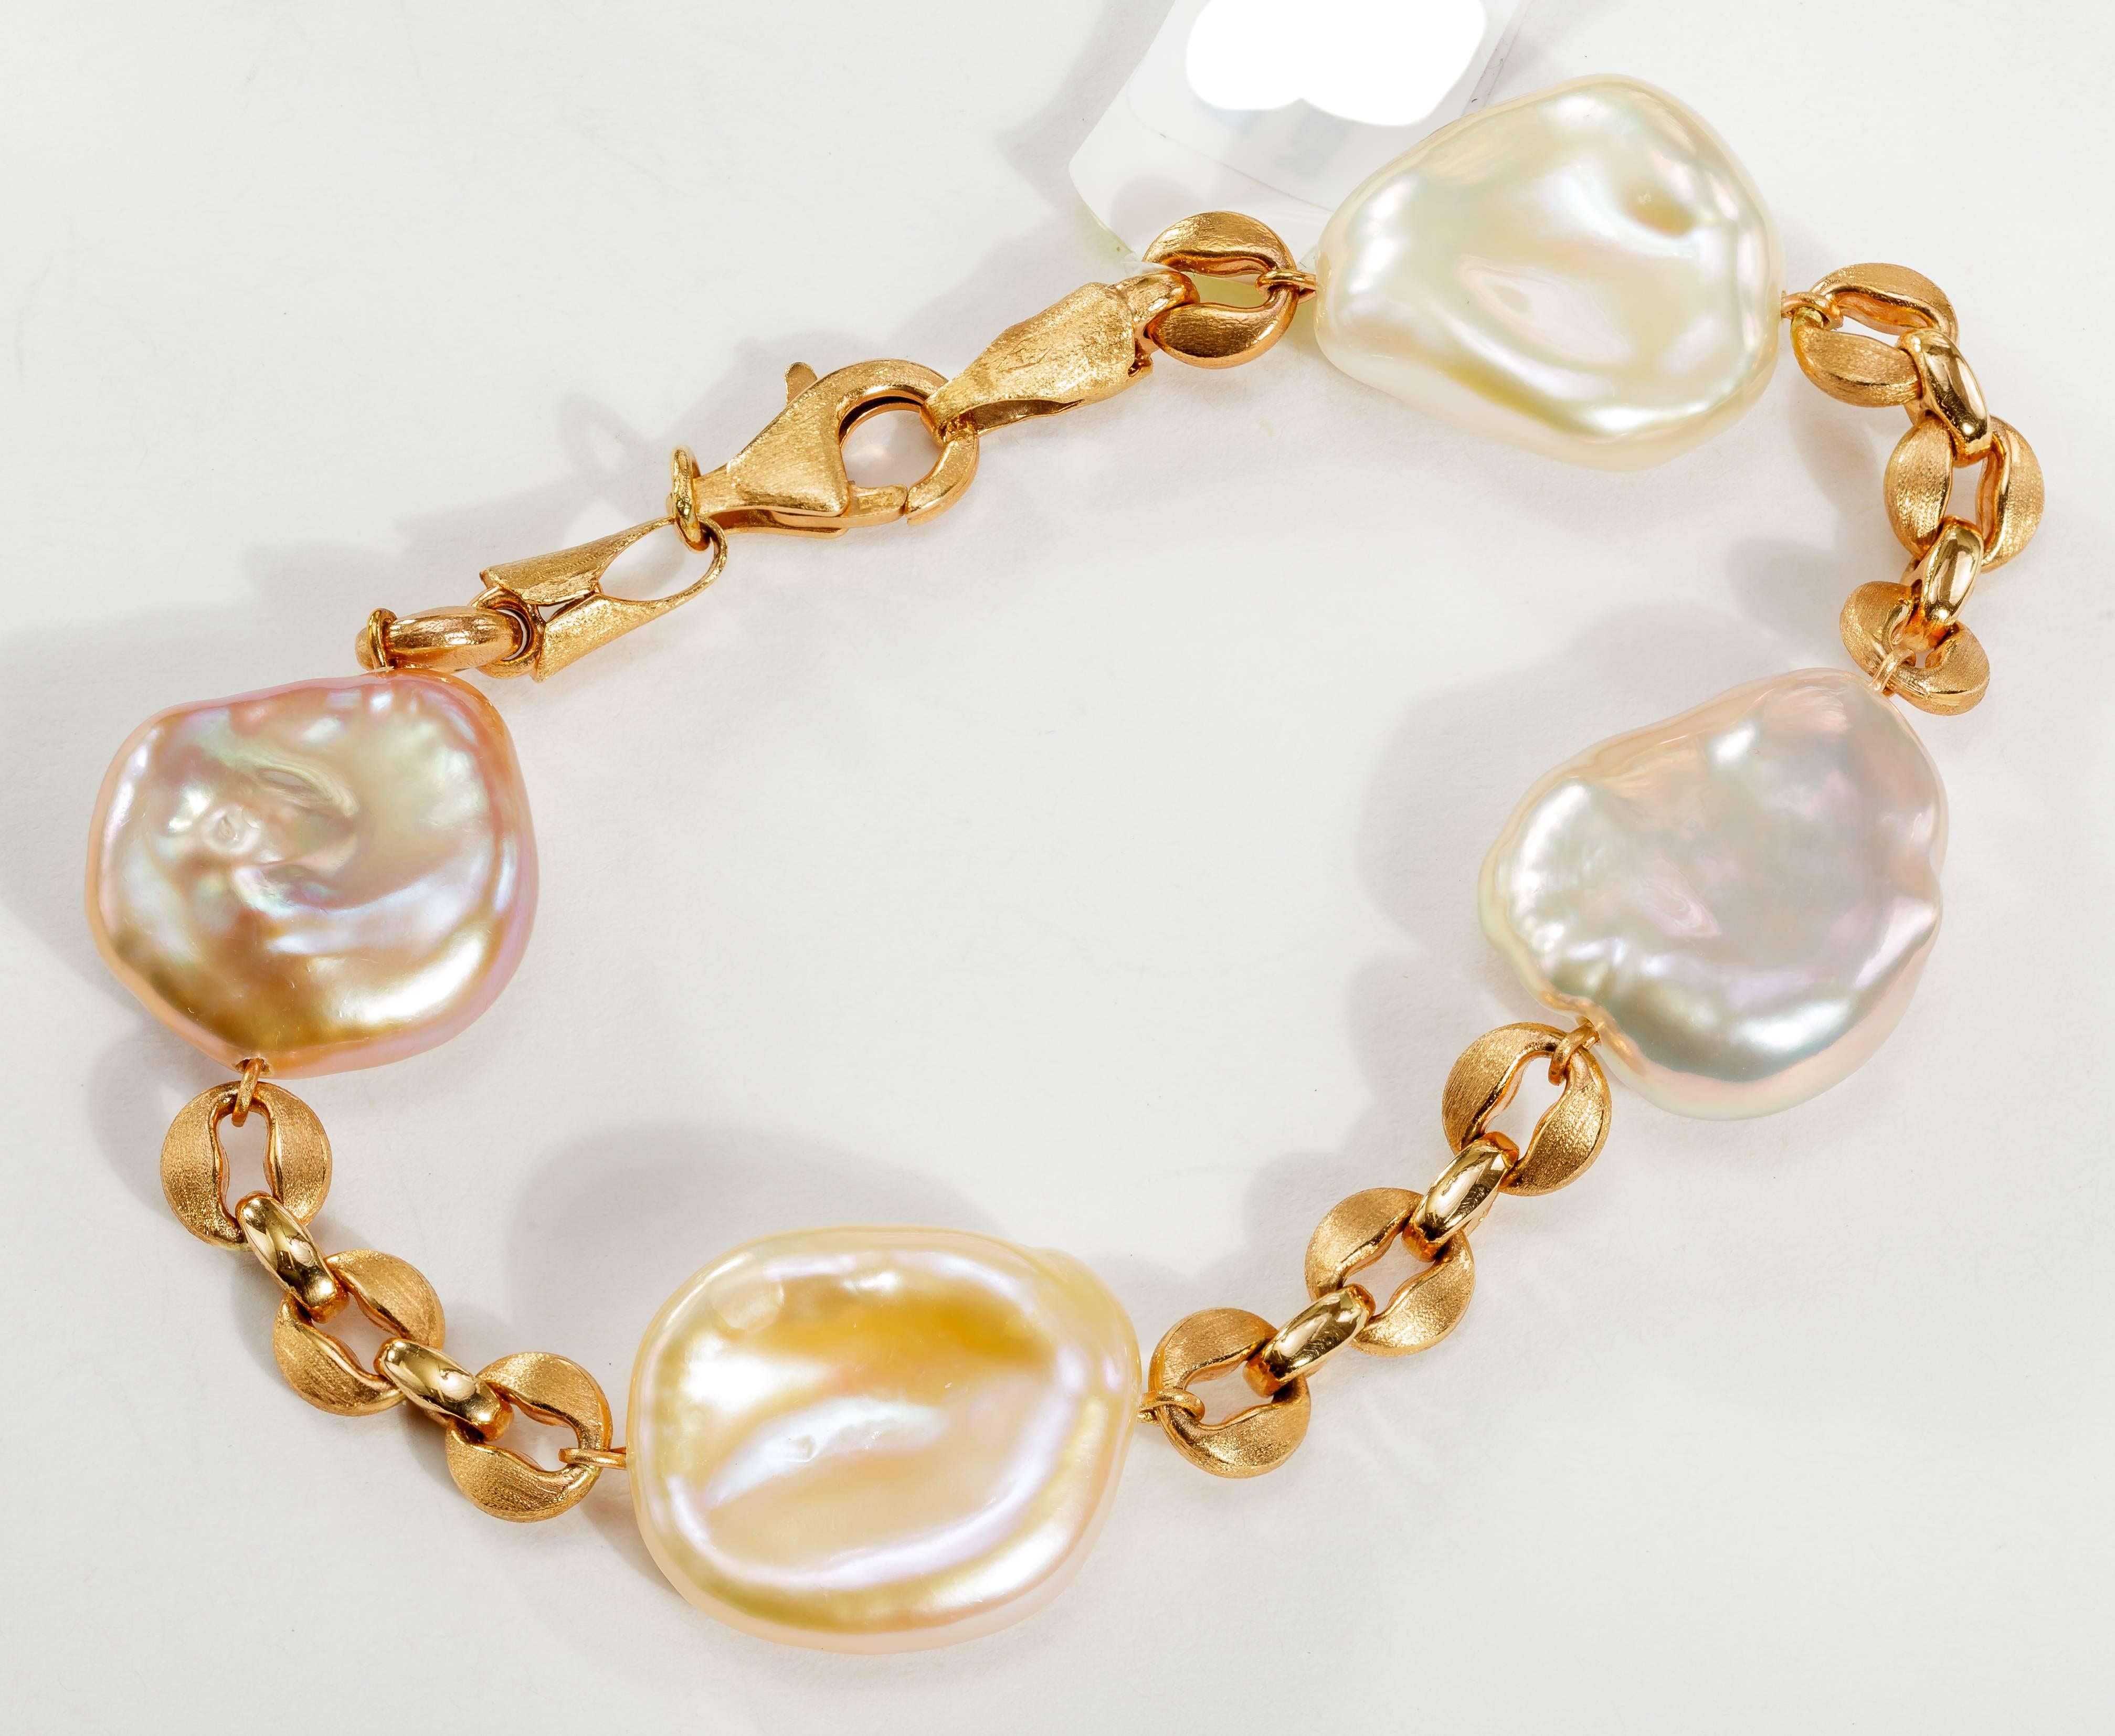 This Yvel chain bracelet features 4 freshwater Keshi pearls linked by 18k rose gold.  This bracelet measures 7 inches. 